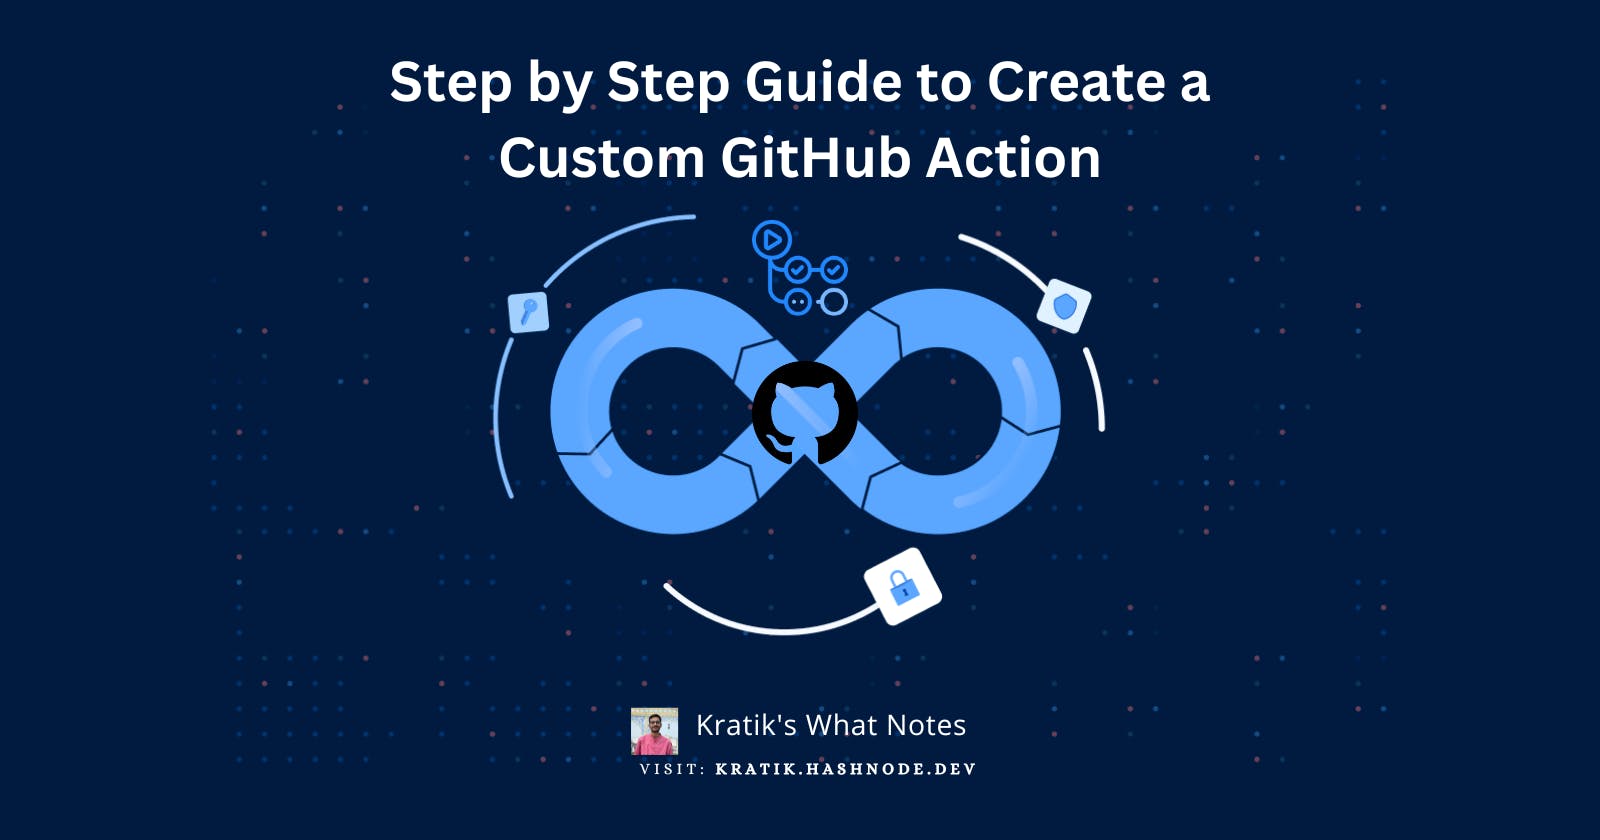 Step by Step Guide to Create a Custom GitHub Action and Marketplace Publishing